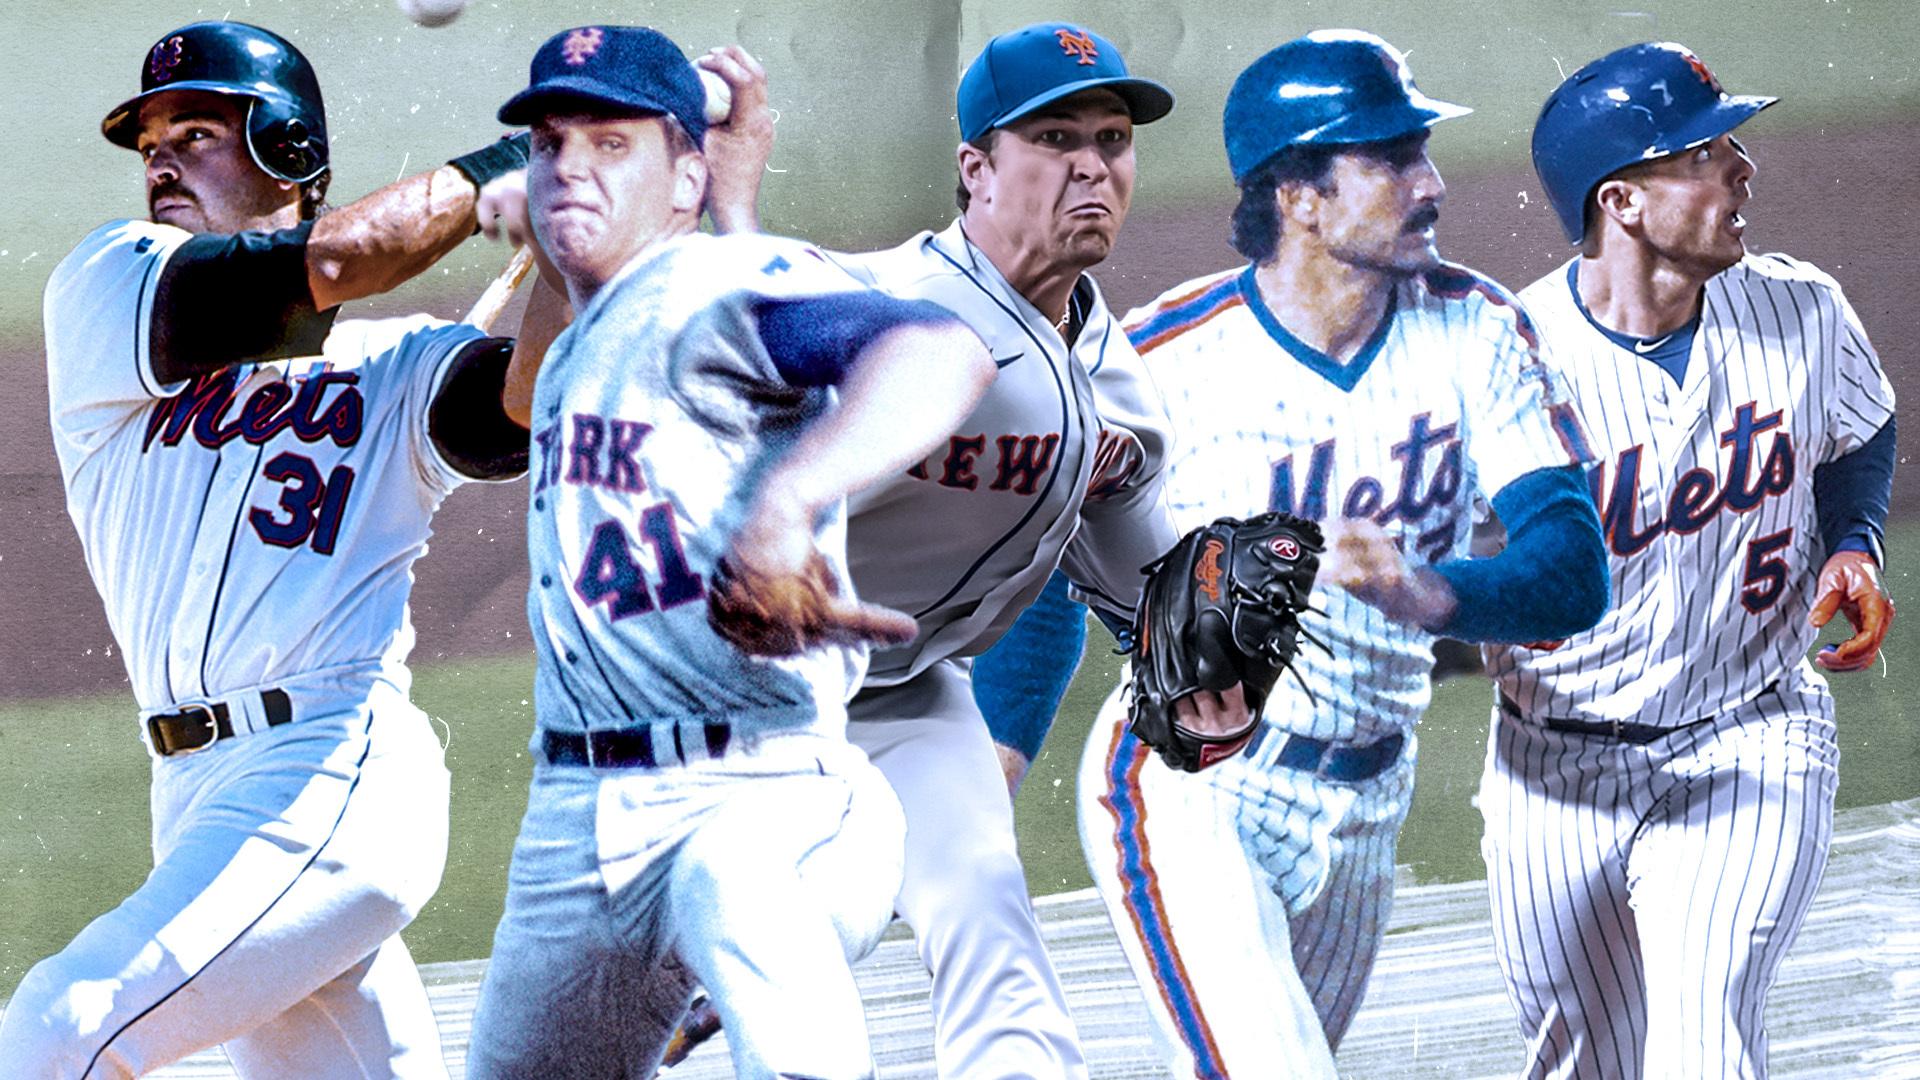 Mike Piazza .Tom Seaver,Jacob deGrom, Keith Hernandez, and David Wright / USA TODAY Sports/SNY Treated Image